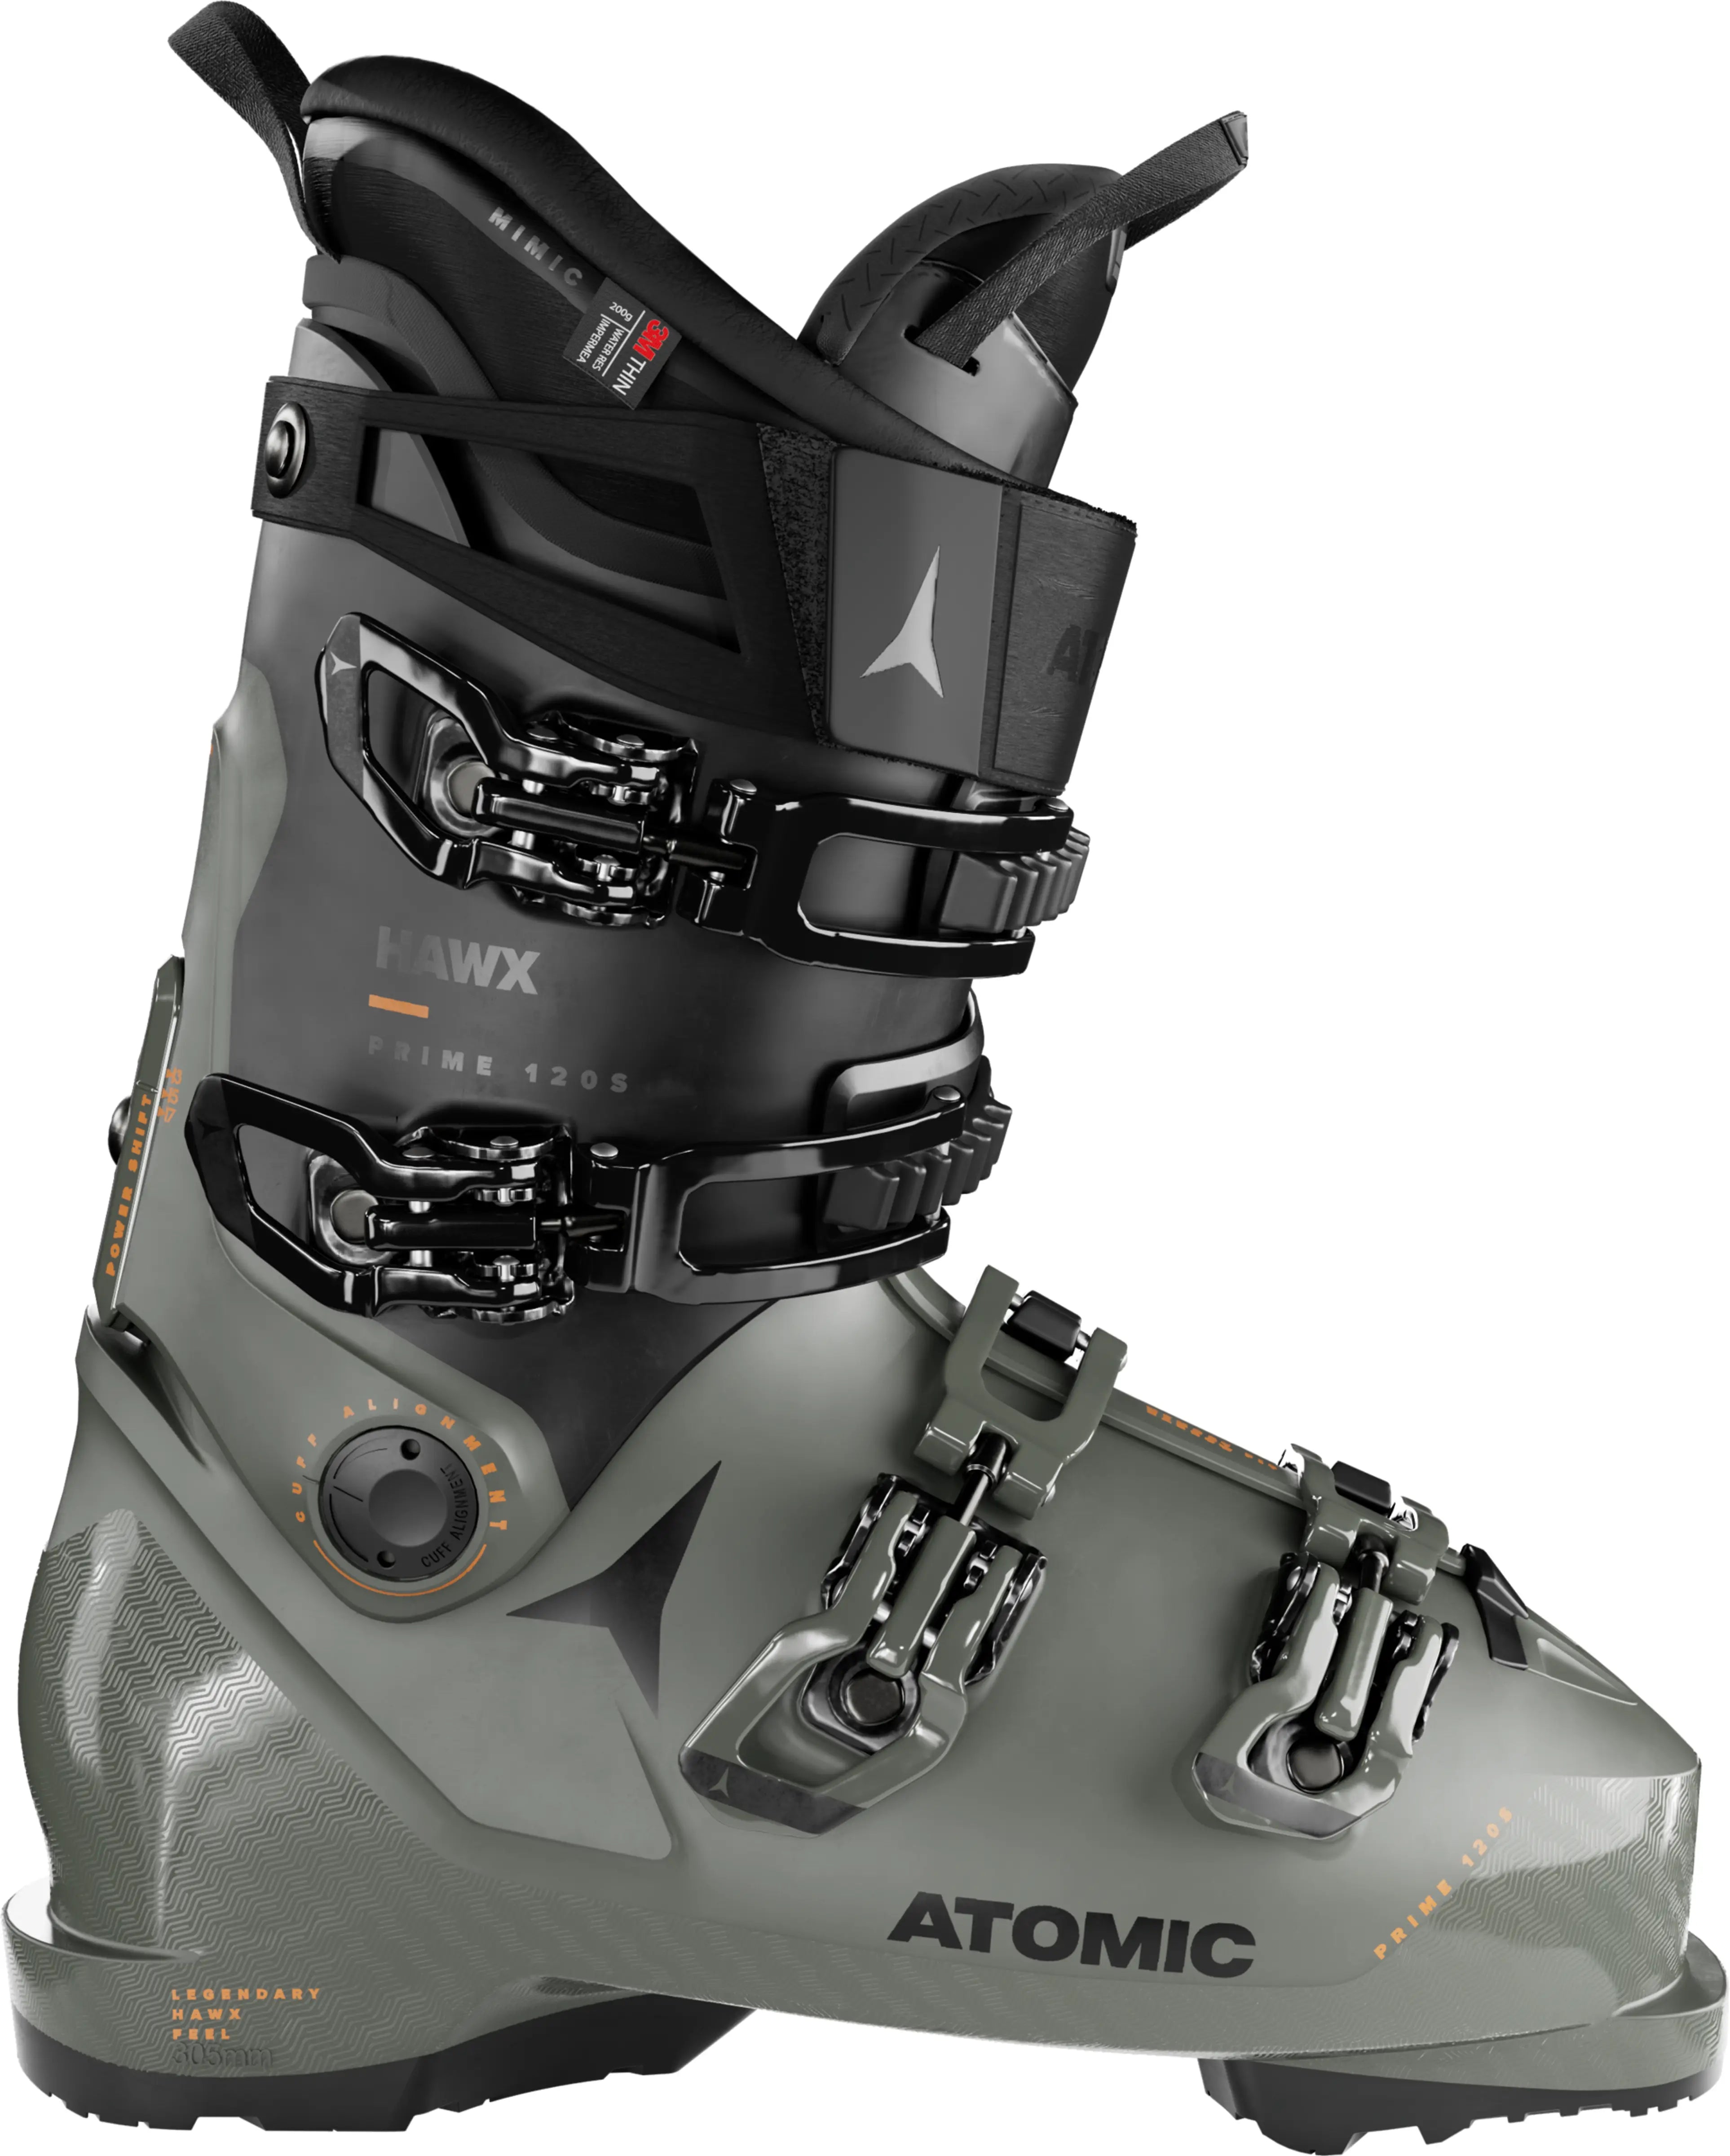 The all-mountain Atomic Hawx Prime 120 S GW is a high-performance, medium-fit ski boot with a strong flex and unrivaled comfort.